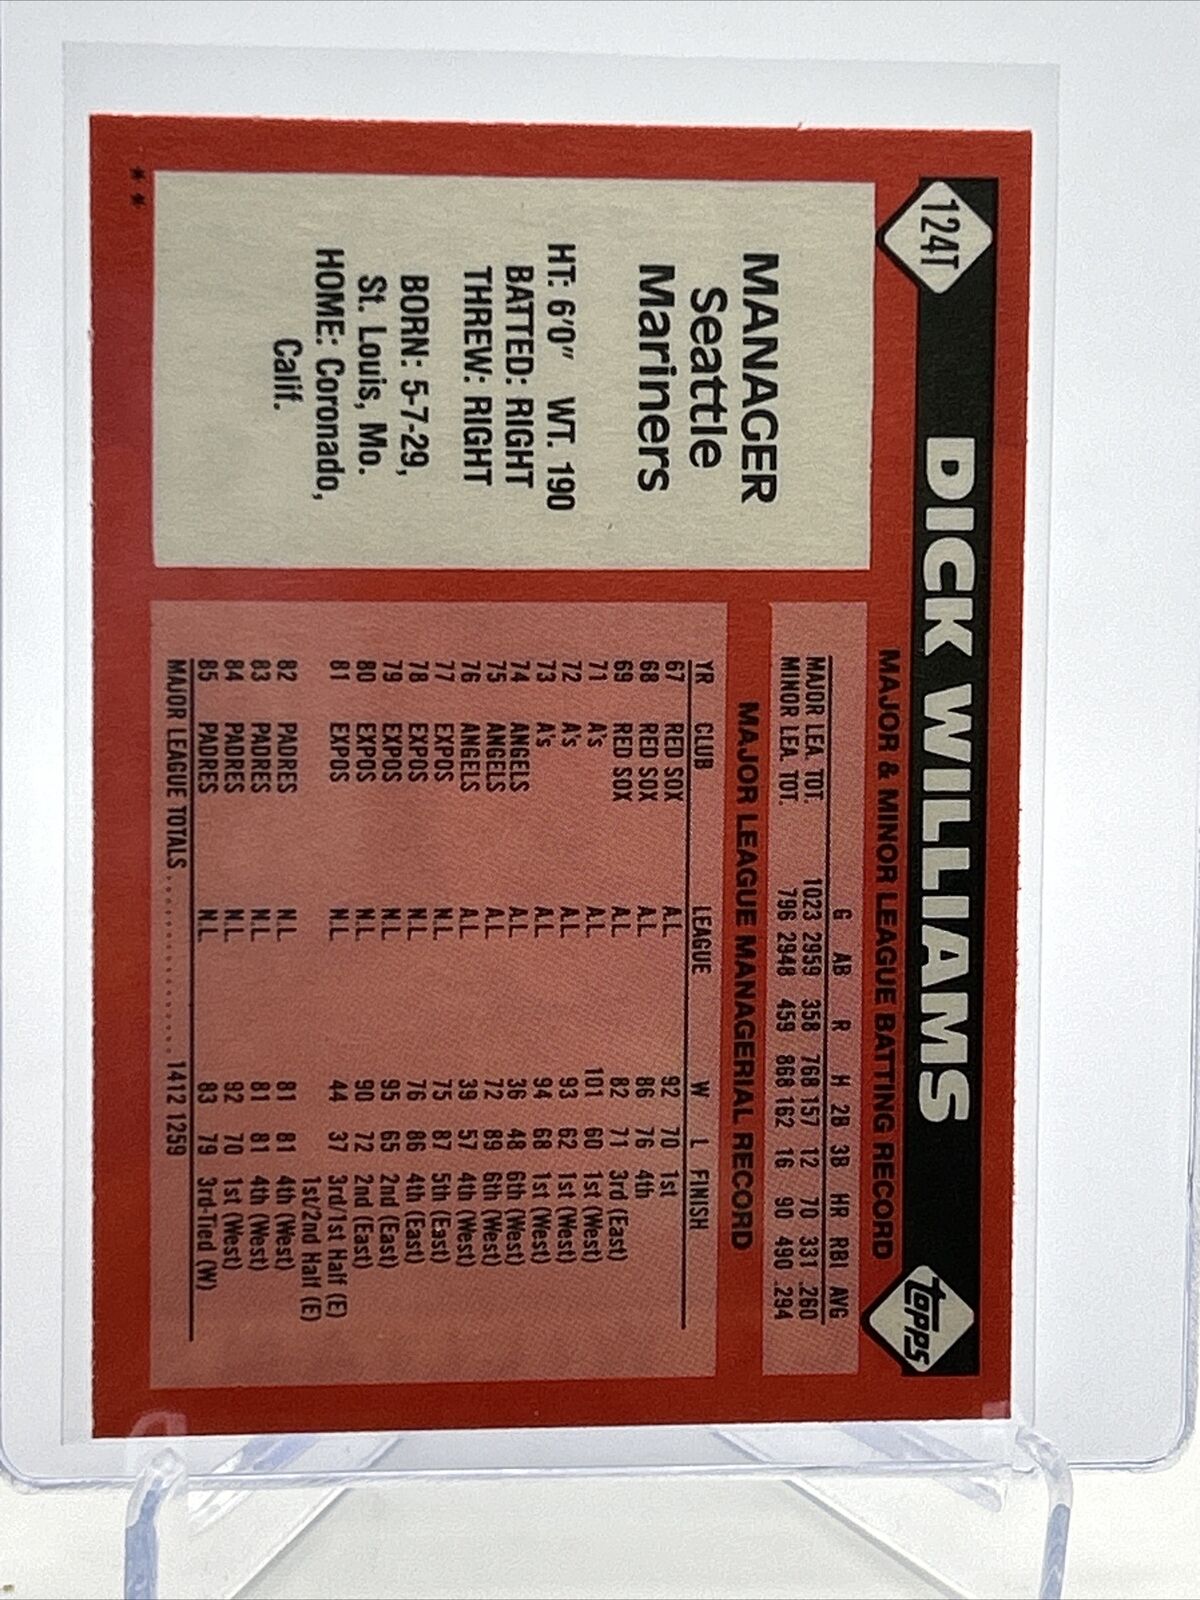 1986 Topps Traded Dick Williams Baseball Card #124T NM-MT FREE SHIPPING